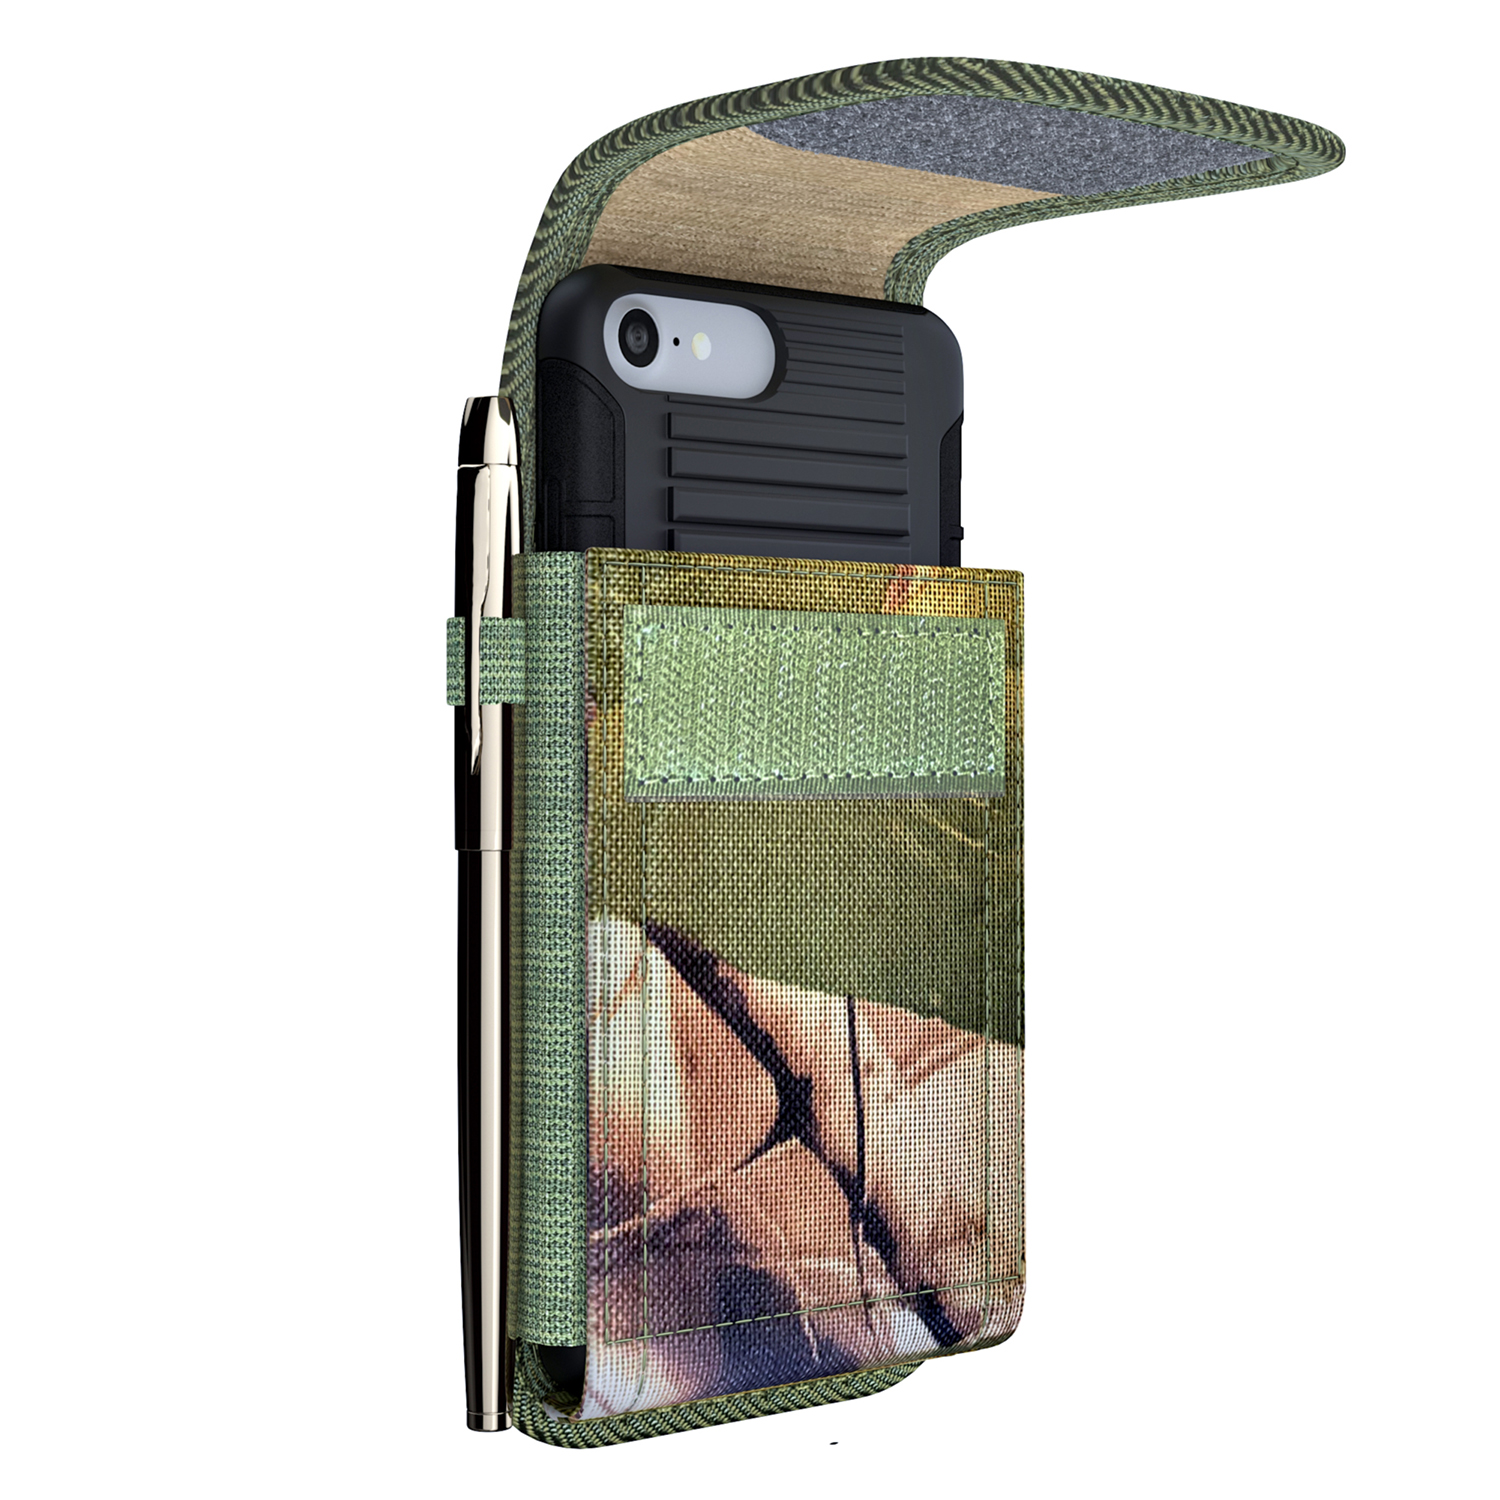 iPhone 11 Pro Max/Xs Max Holster Case - Rugged Nylon Belt Clip Case Cell Phone Carrying Pouch Holder Belt Holster for Apple iPhone 11 Pro Max/Xs Max (Fits Phone w/Otterbox Case on) Camo - image 4 of 6